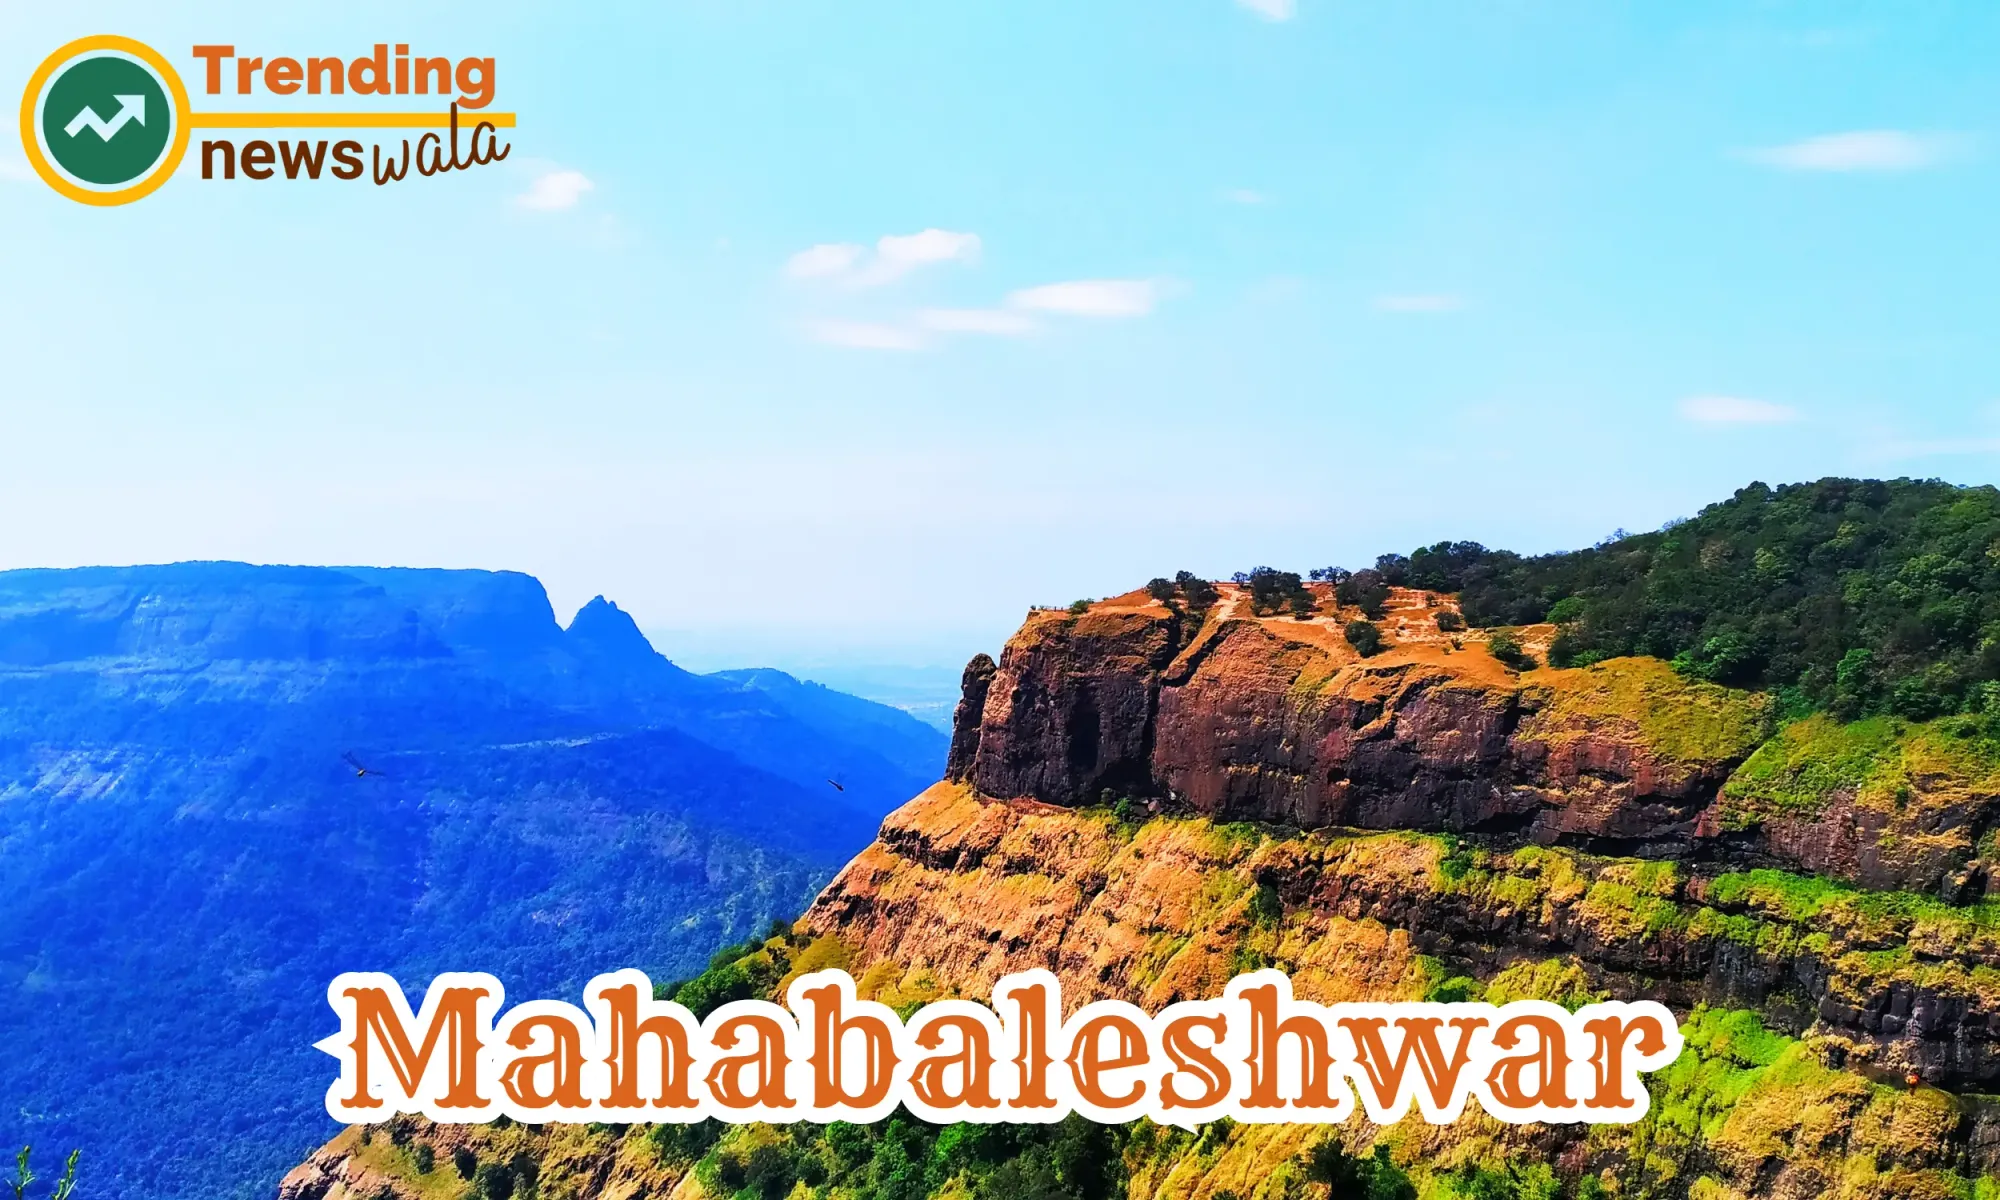 Mahabaleshwar is a popular hill station and tourist destination